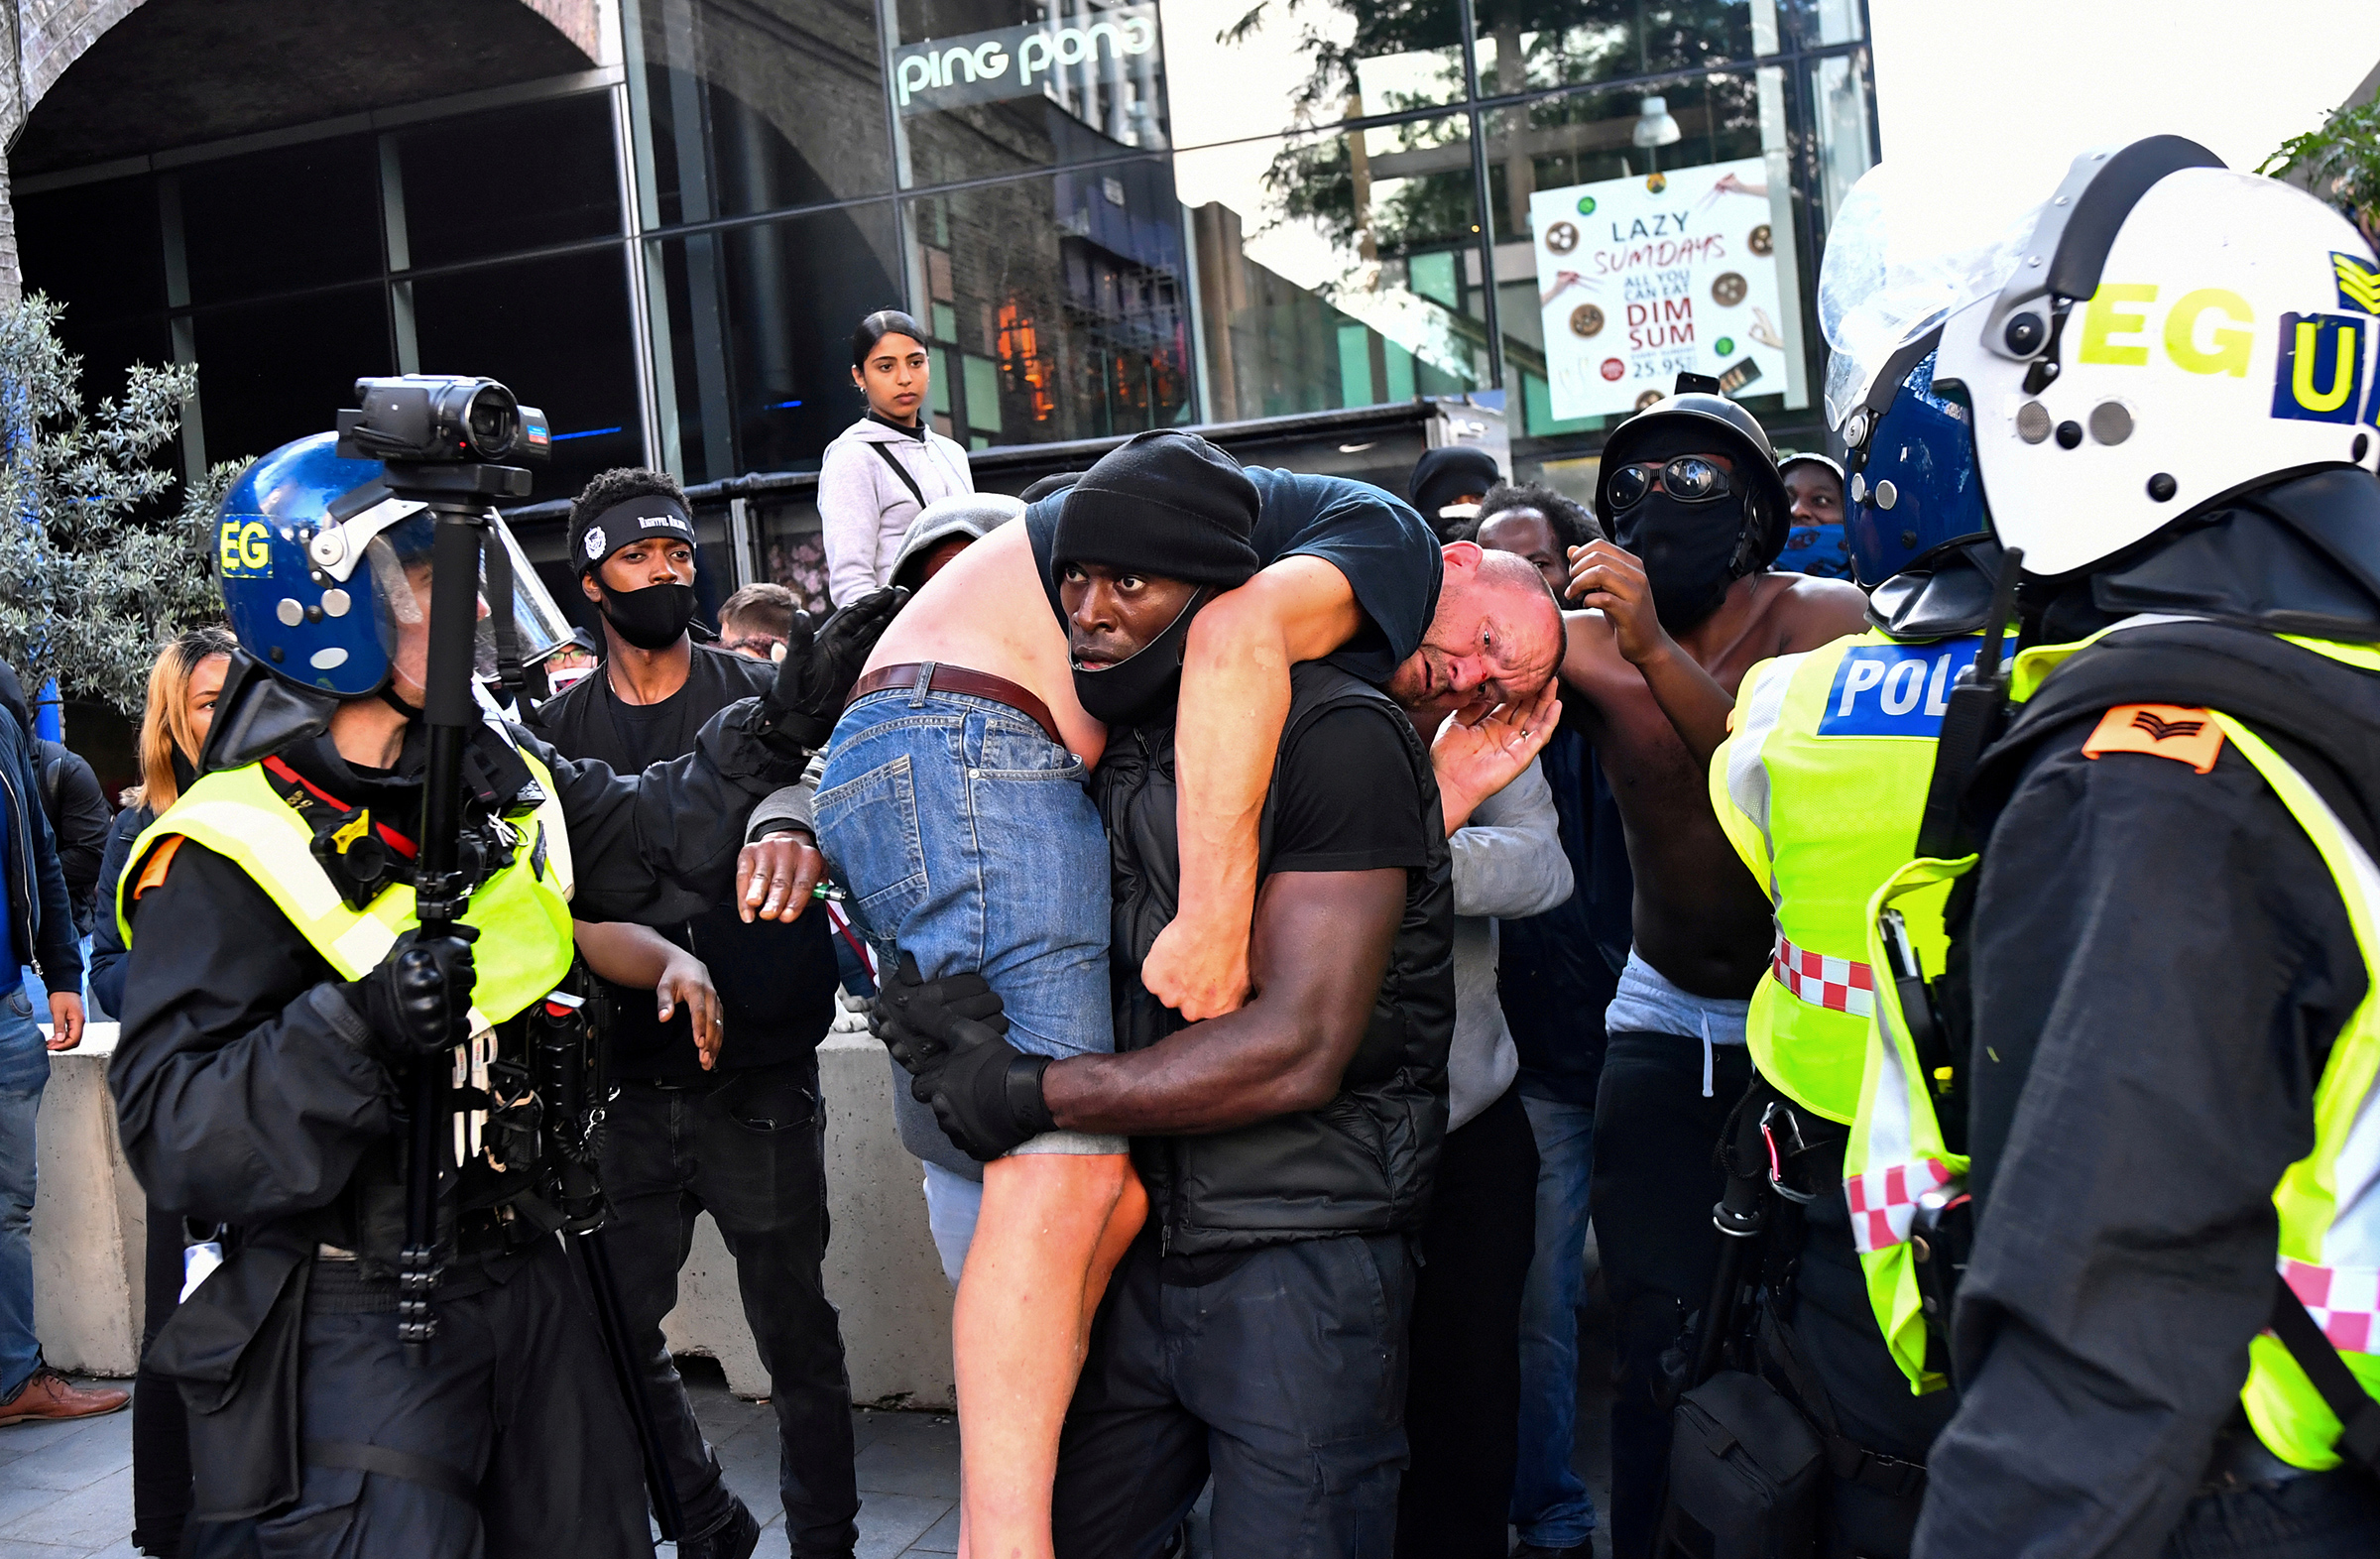 During a Black Lives Matter demonstration in London on June 13, protester Patrick Hutchinson carries an injured counter-protester to safety near Waterloo Station.